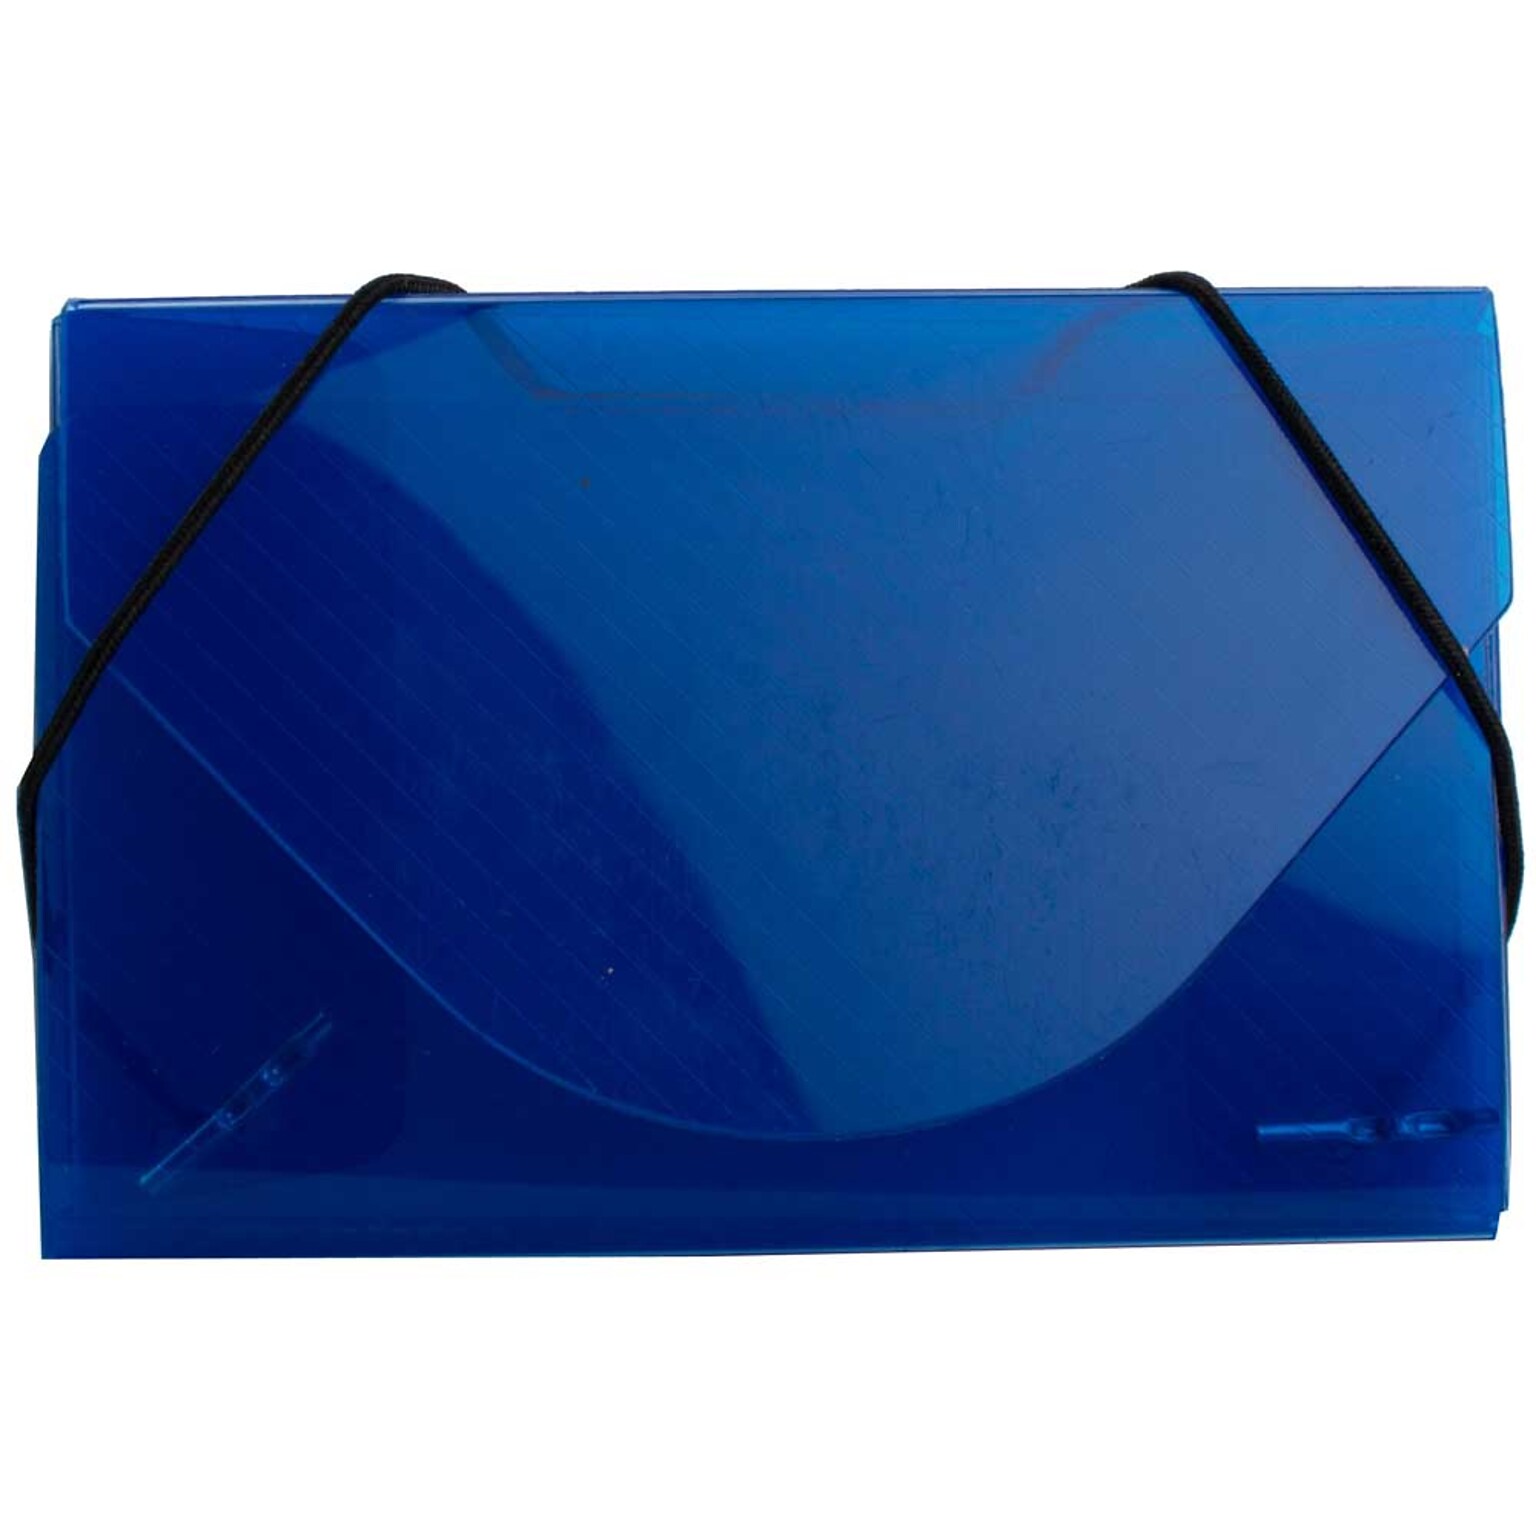 JAM Paper® Plastic Business Card Holder Case, Blue, Sold Individually (2500005)